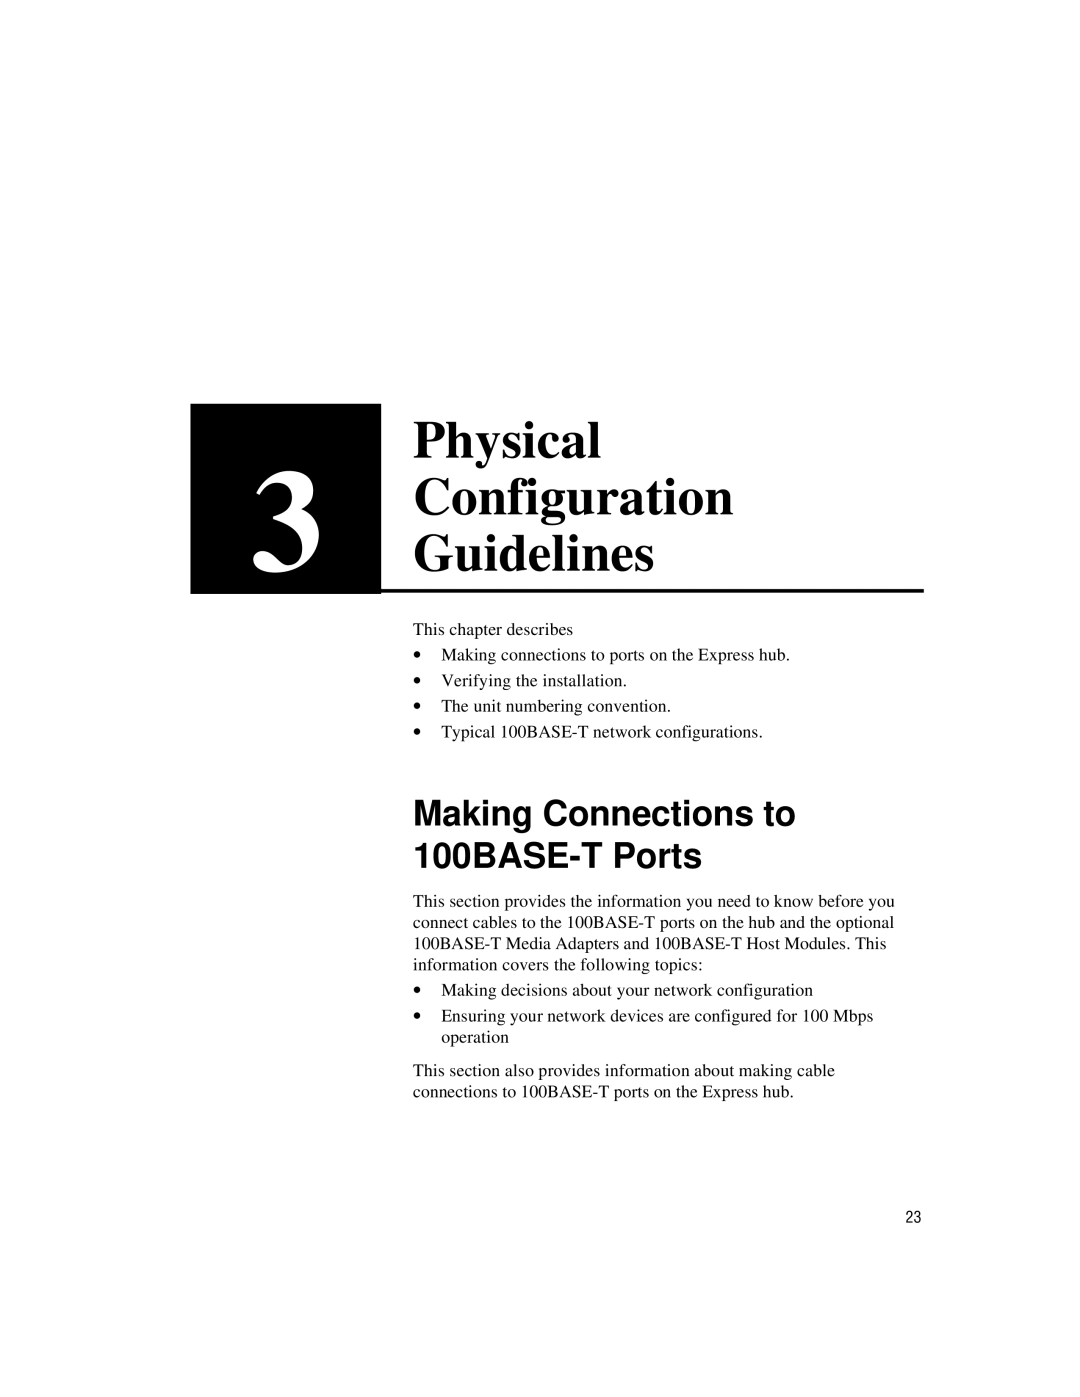 Intel 100BASE-TX manual Physical Configuration Guidelines, Making Connections to 100BASE-TPorts 